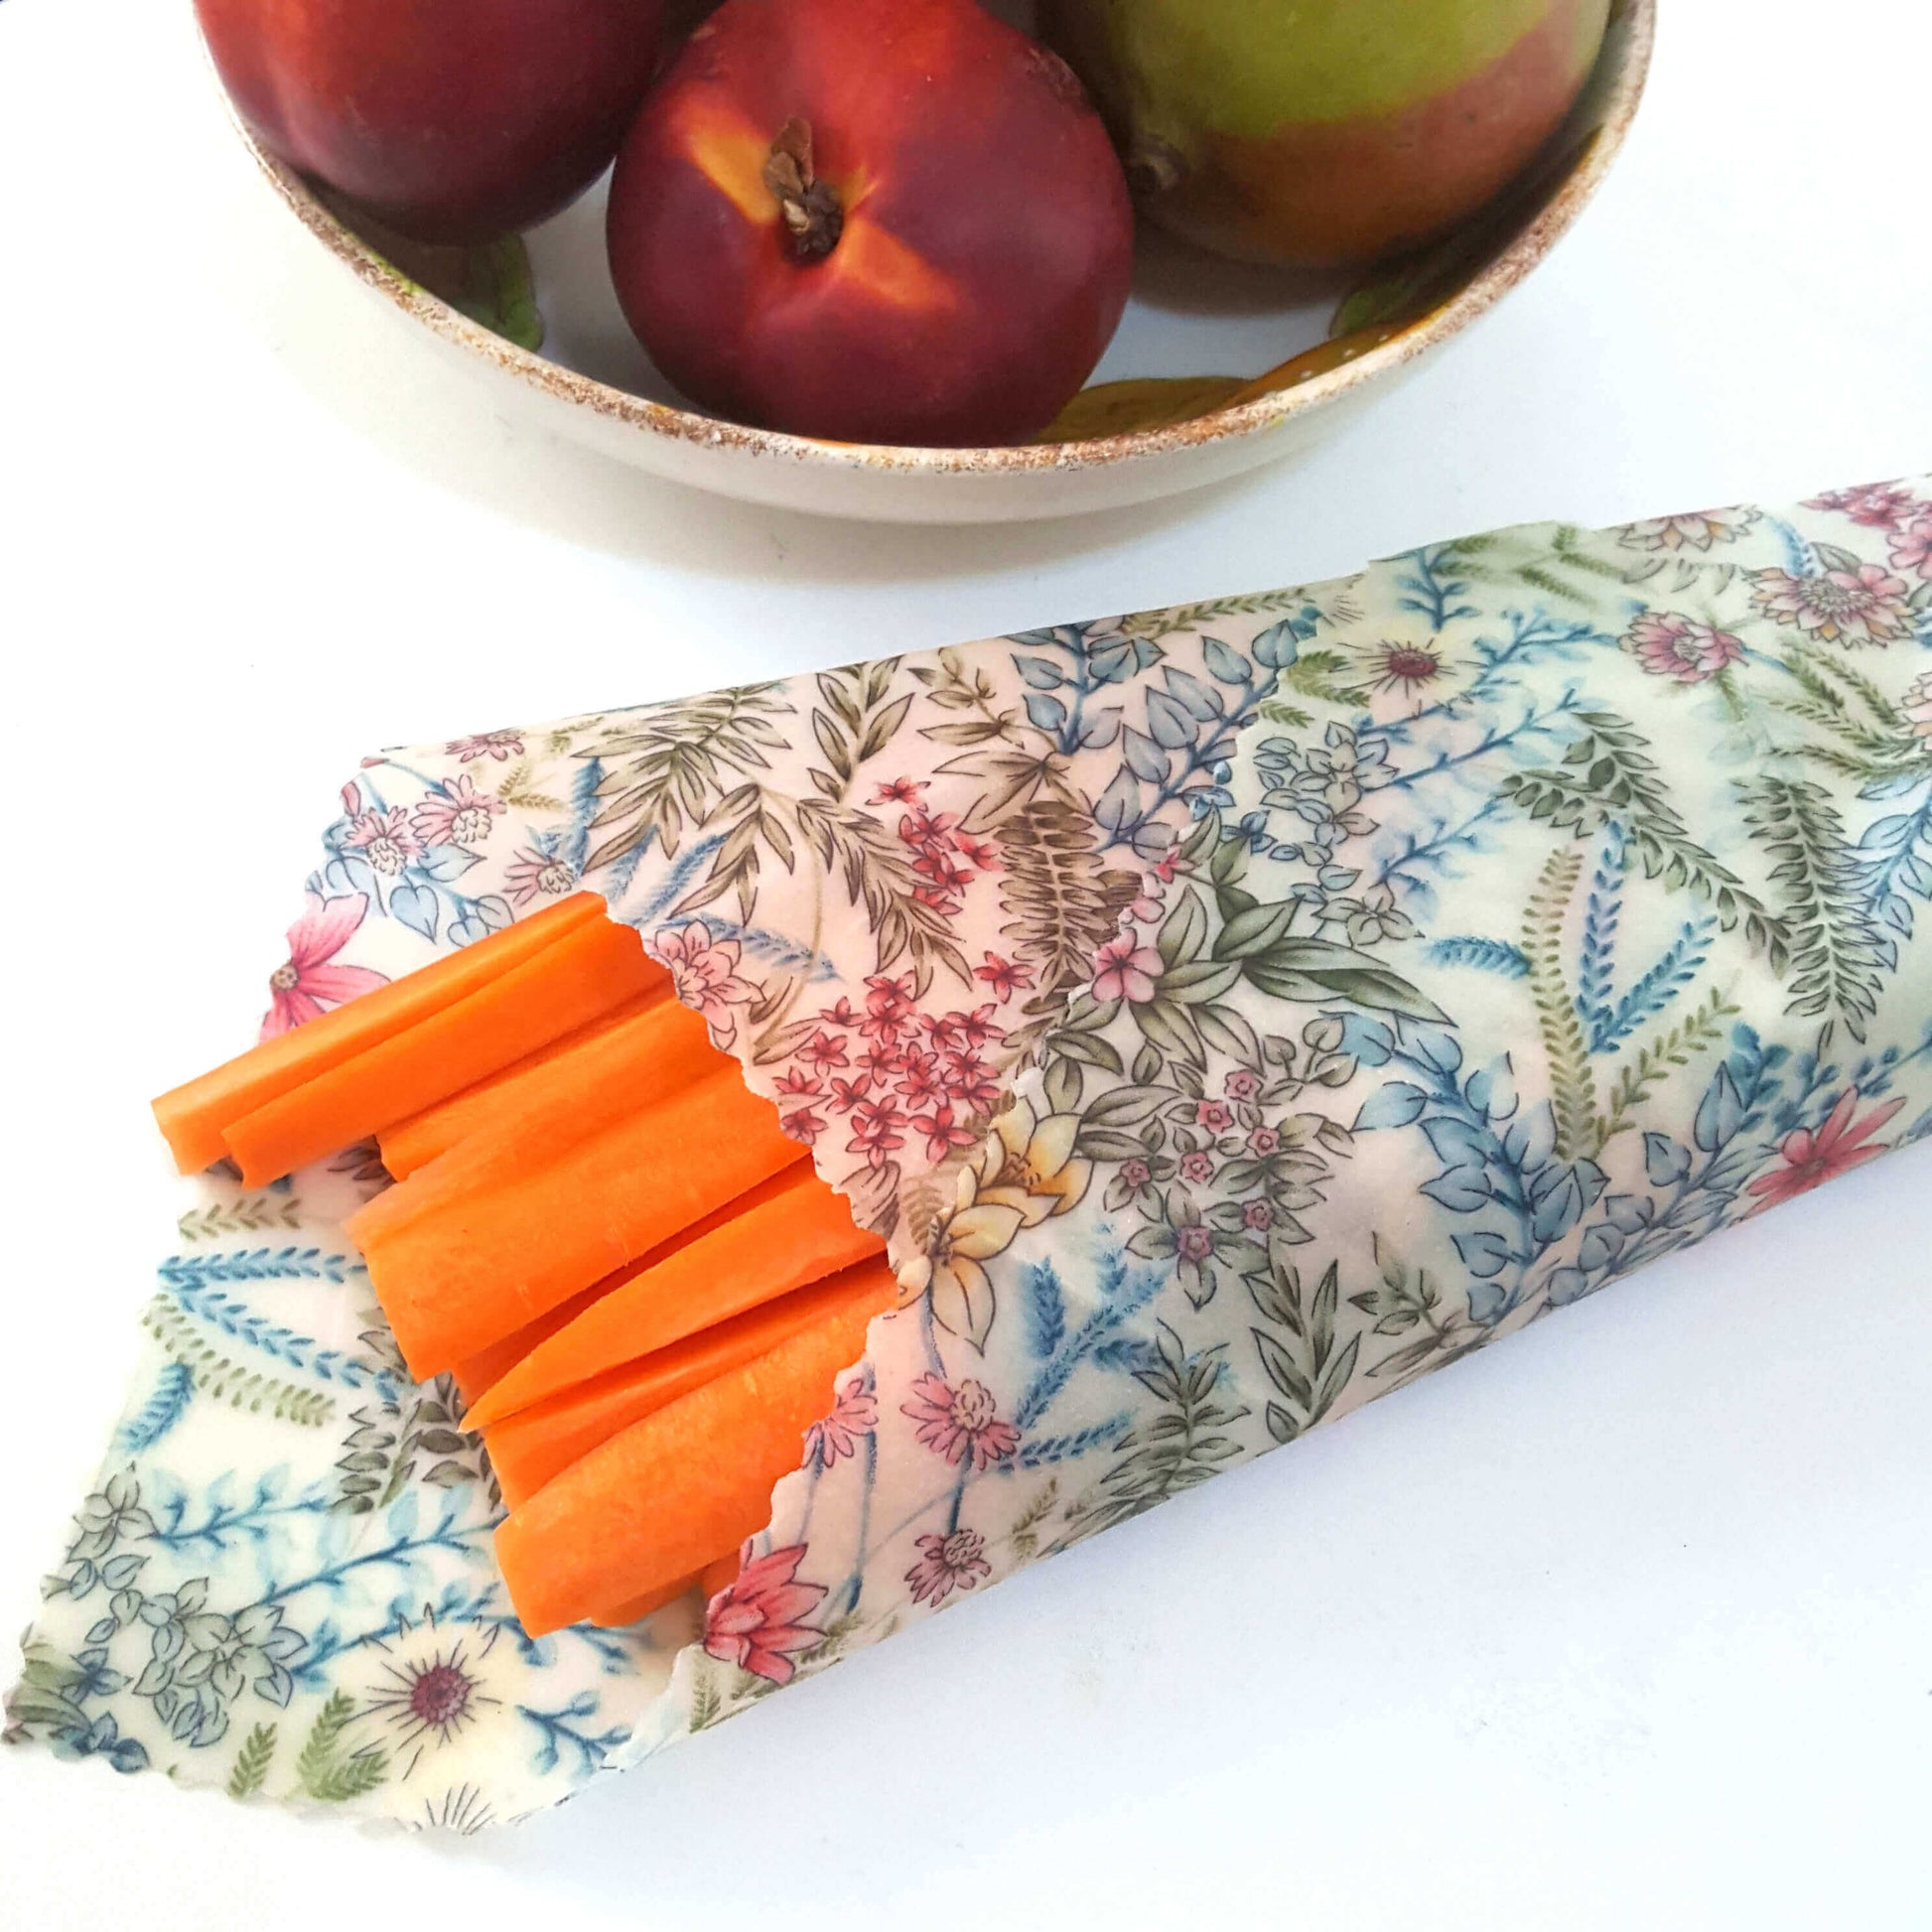 Reusable Beeswax Food Wraps 100% Hand Made in the UK by Honey Bee Good. Planet-Kind single large beeswax wrap in Botanical pattern as flatlay with carrots